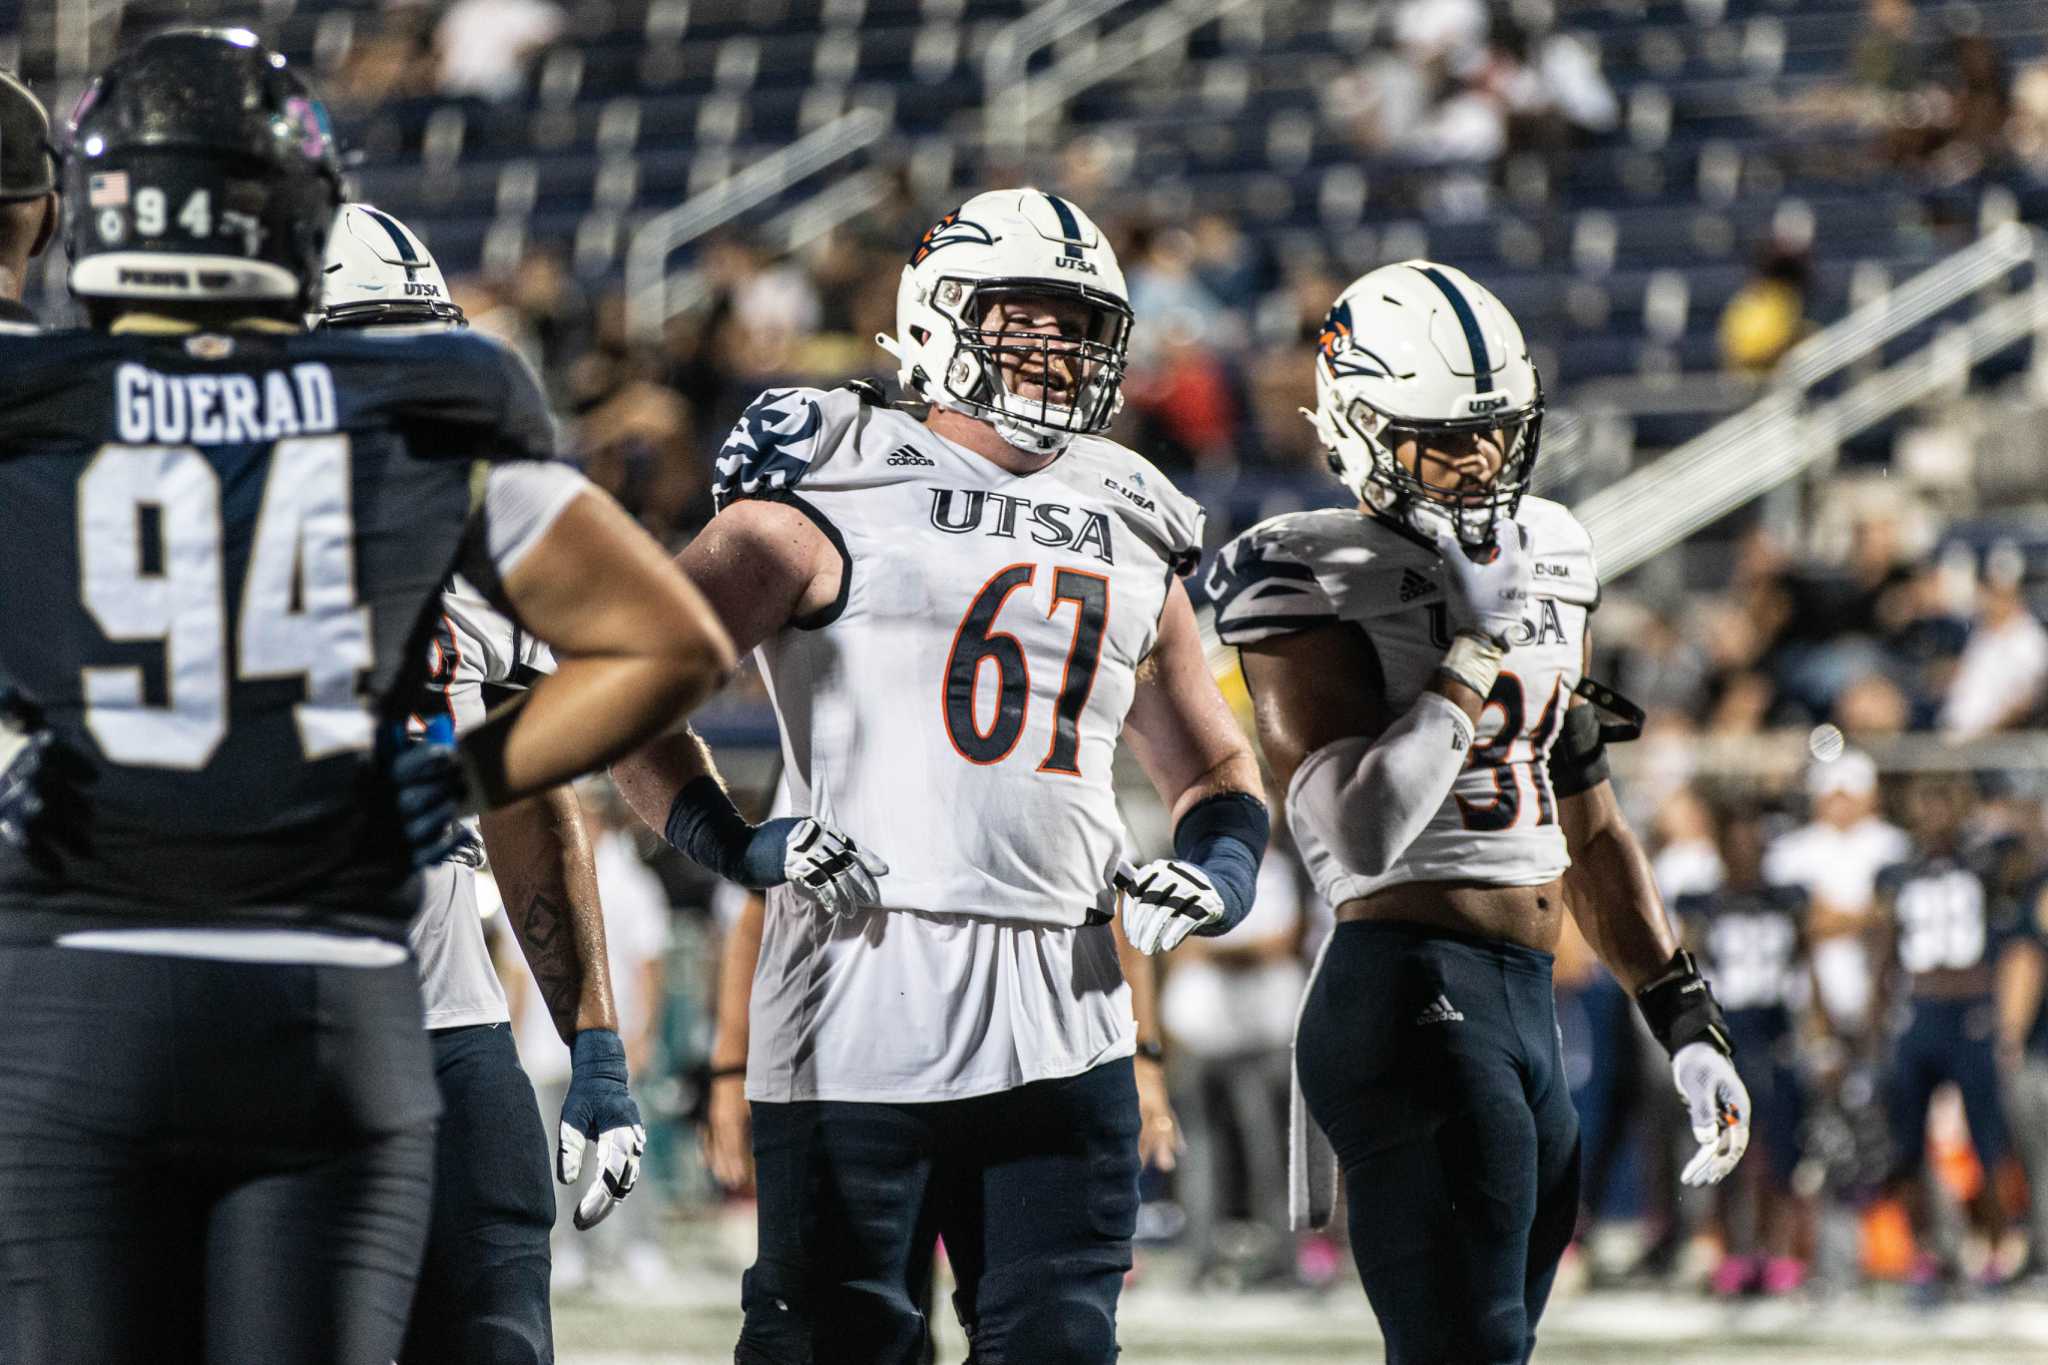 Baty claims top spot at left tackle on UTSA's first depth chart